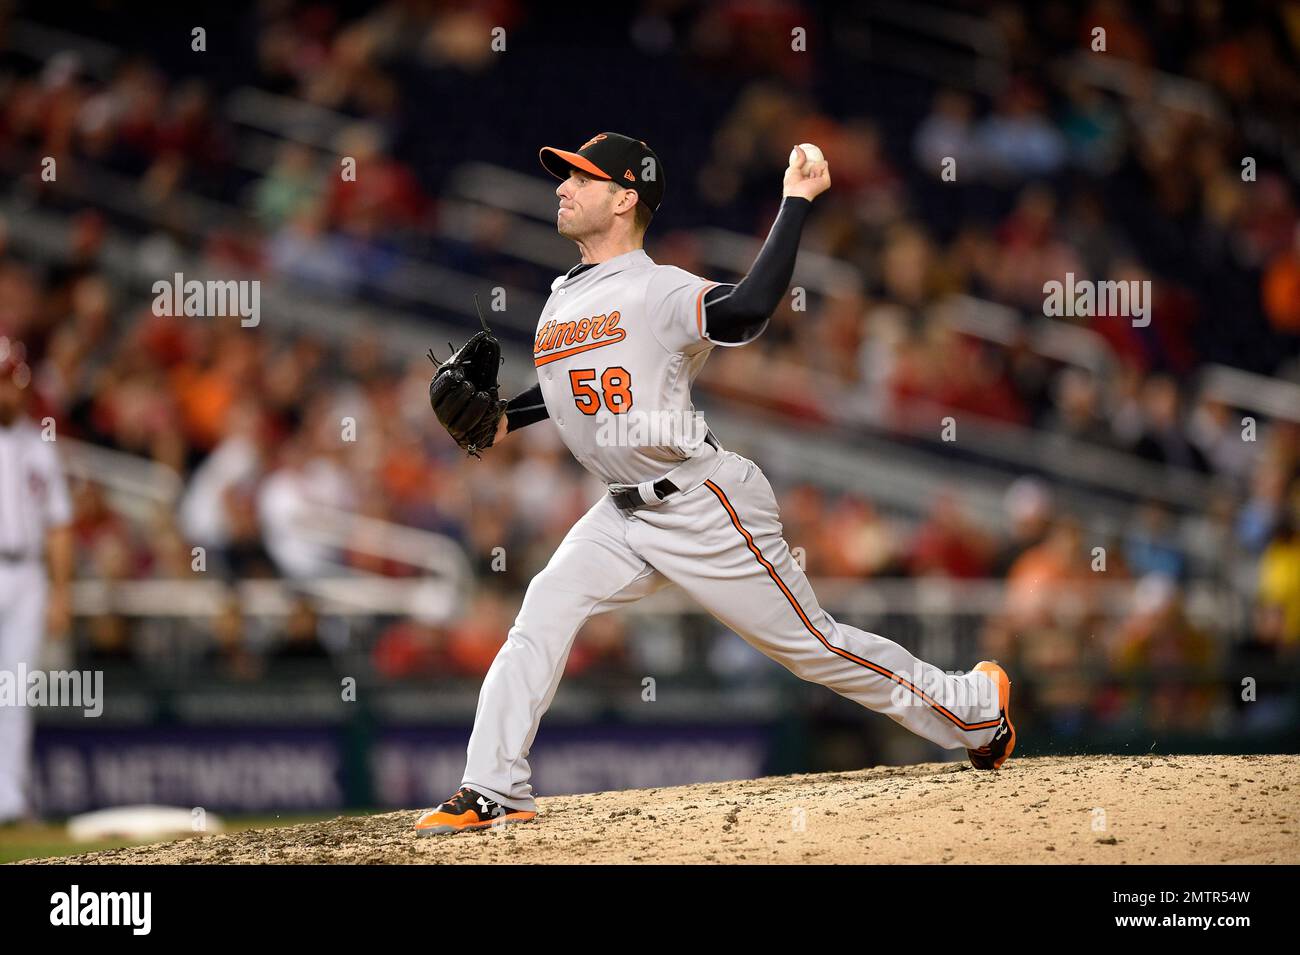 Baltimore Orioles relief pitcher Donnie Hart (58) pitches during an interleague baseball game against the Washington Nationals, Wednesday, May 10, 2017, in Washington